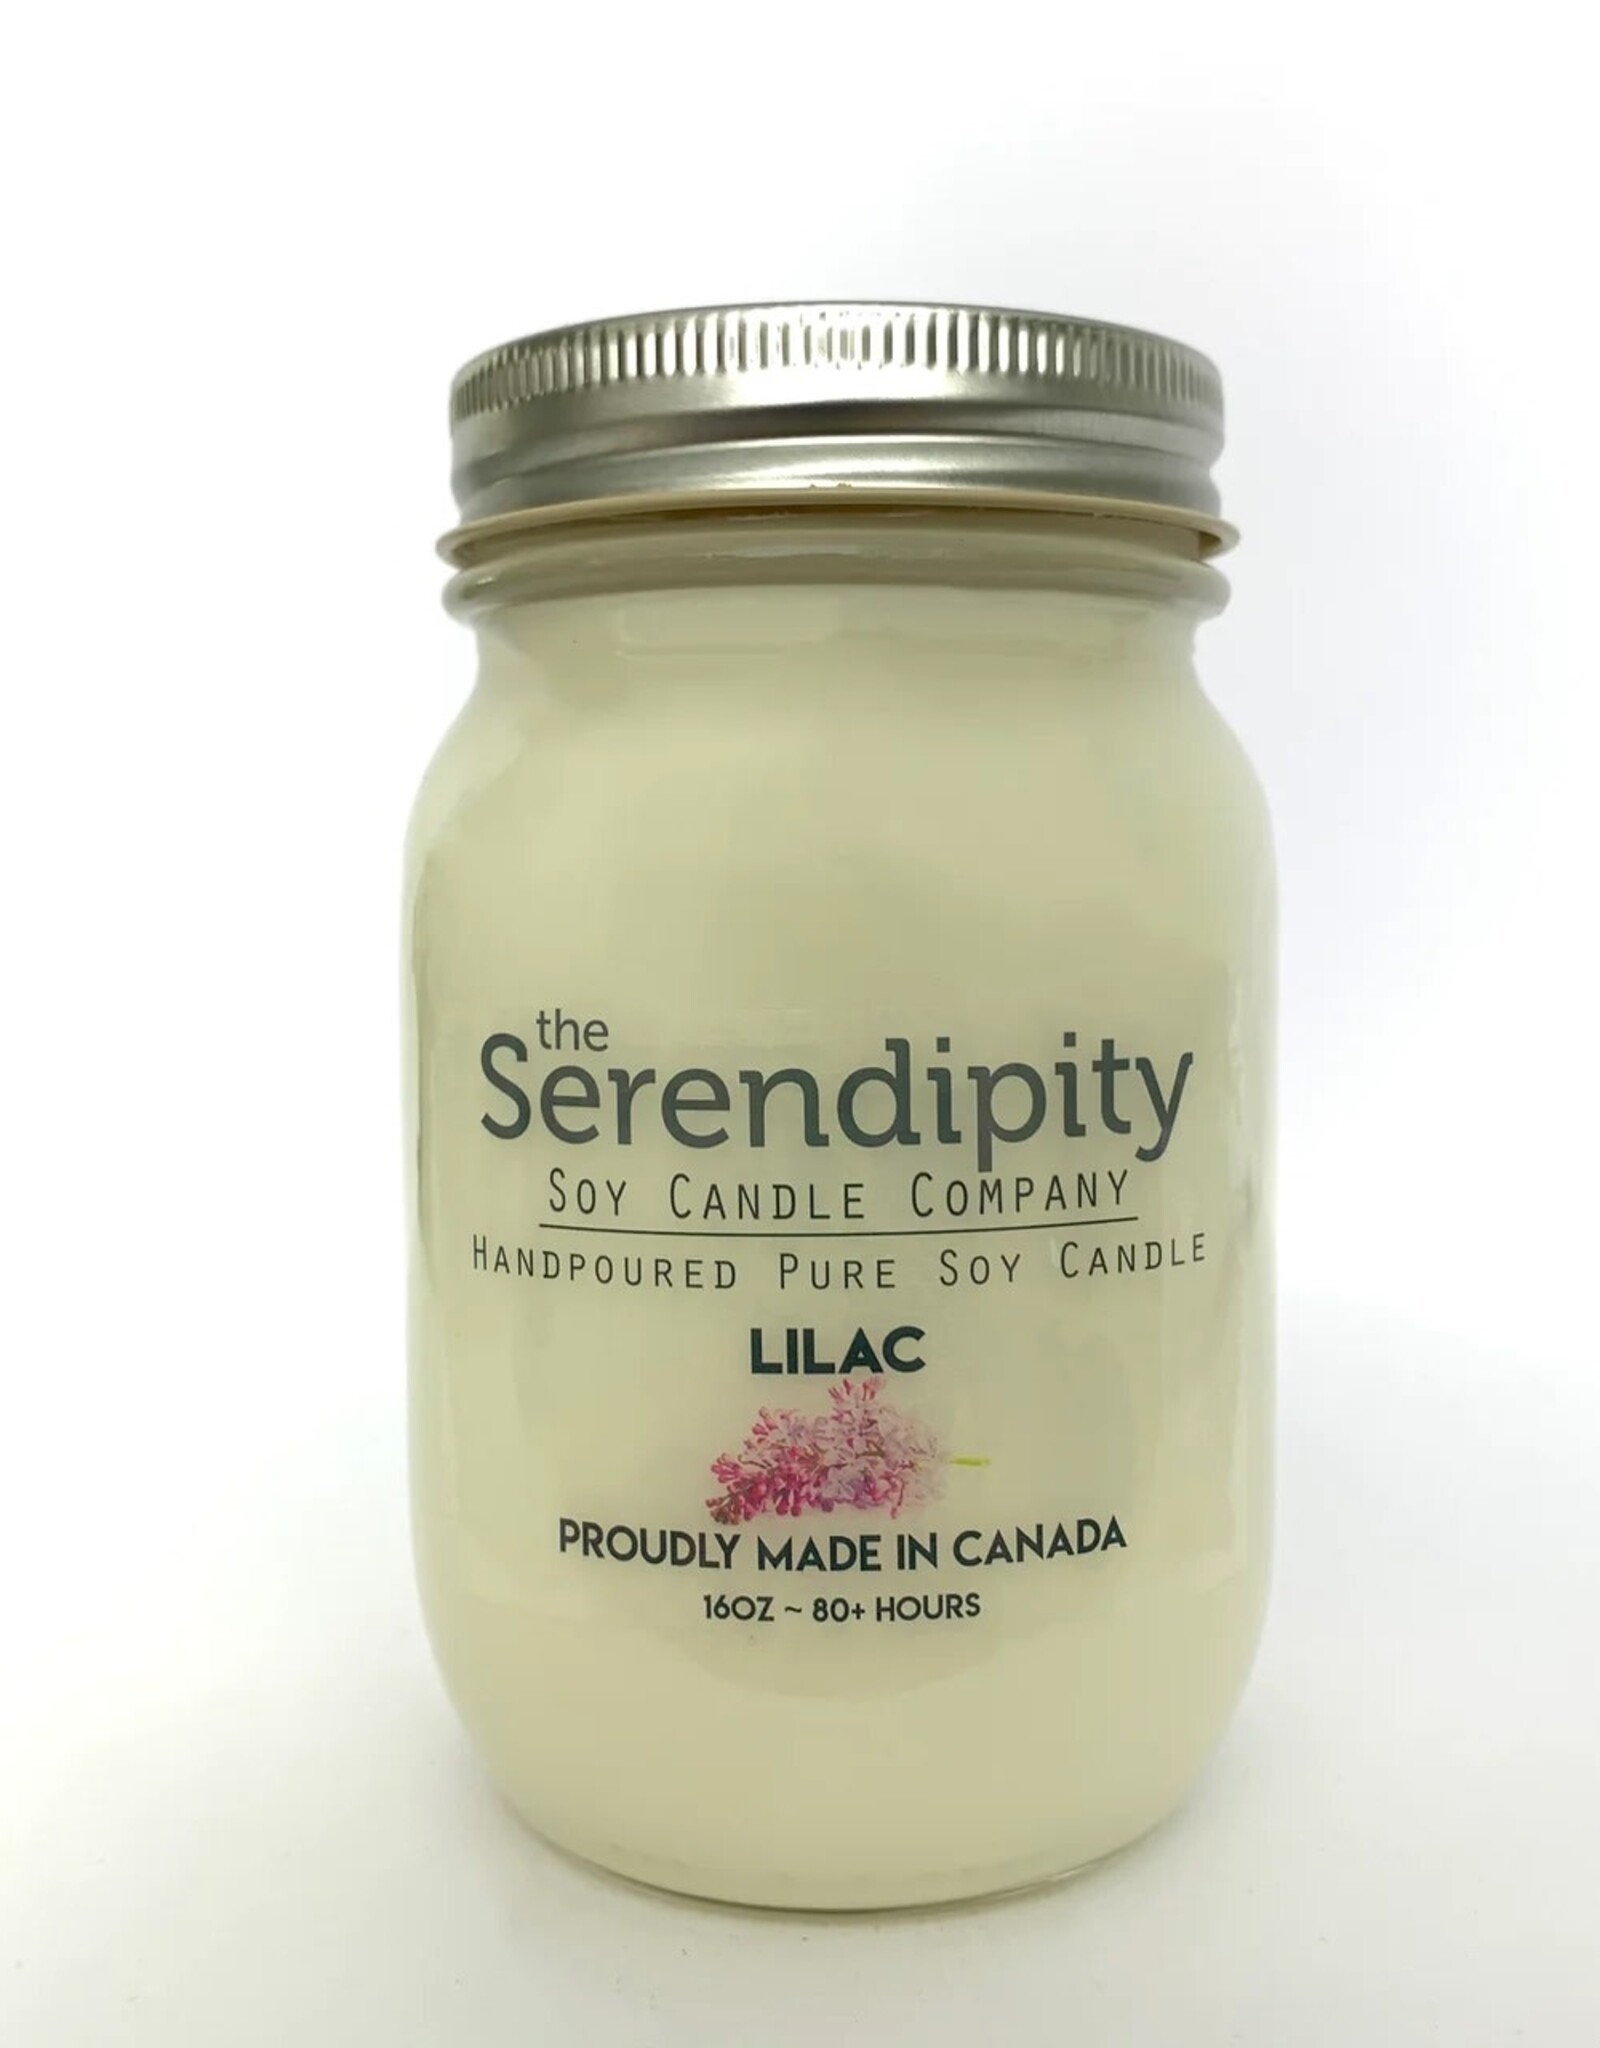 Serendipity Soy Candles 16oz Jar Candle - Lilac